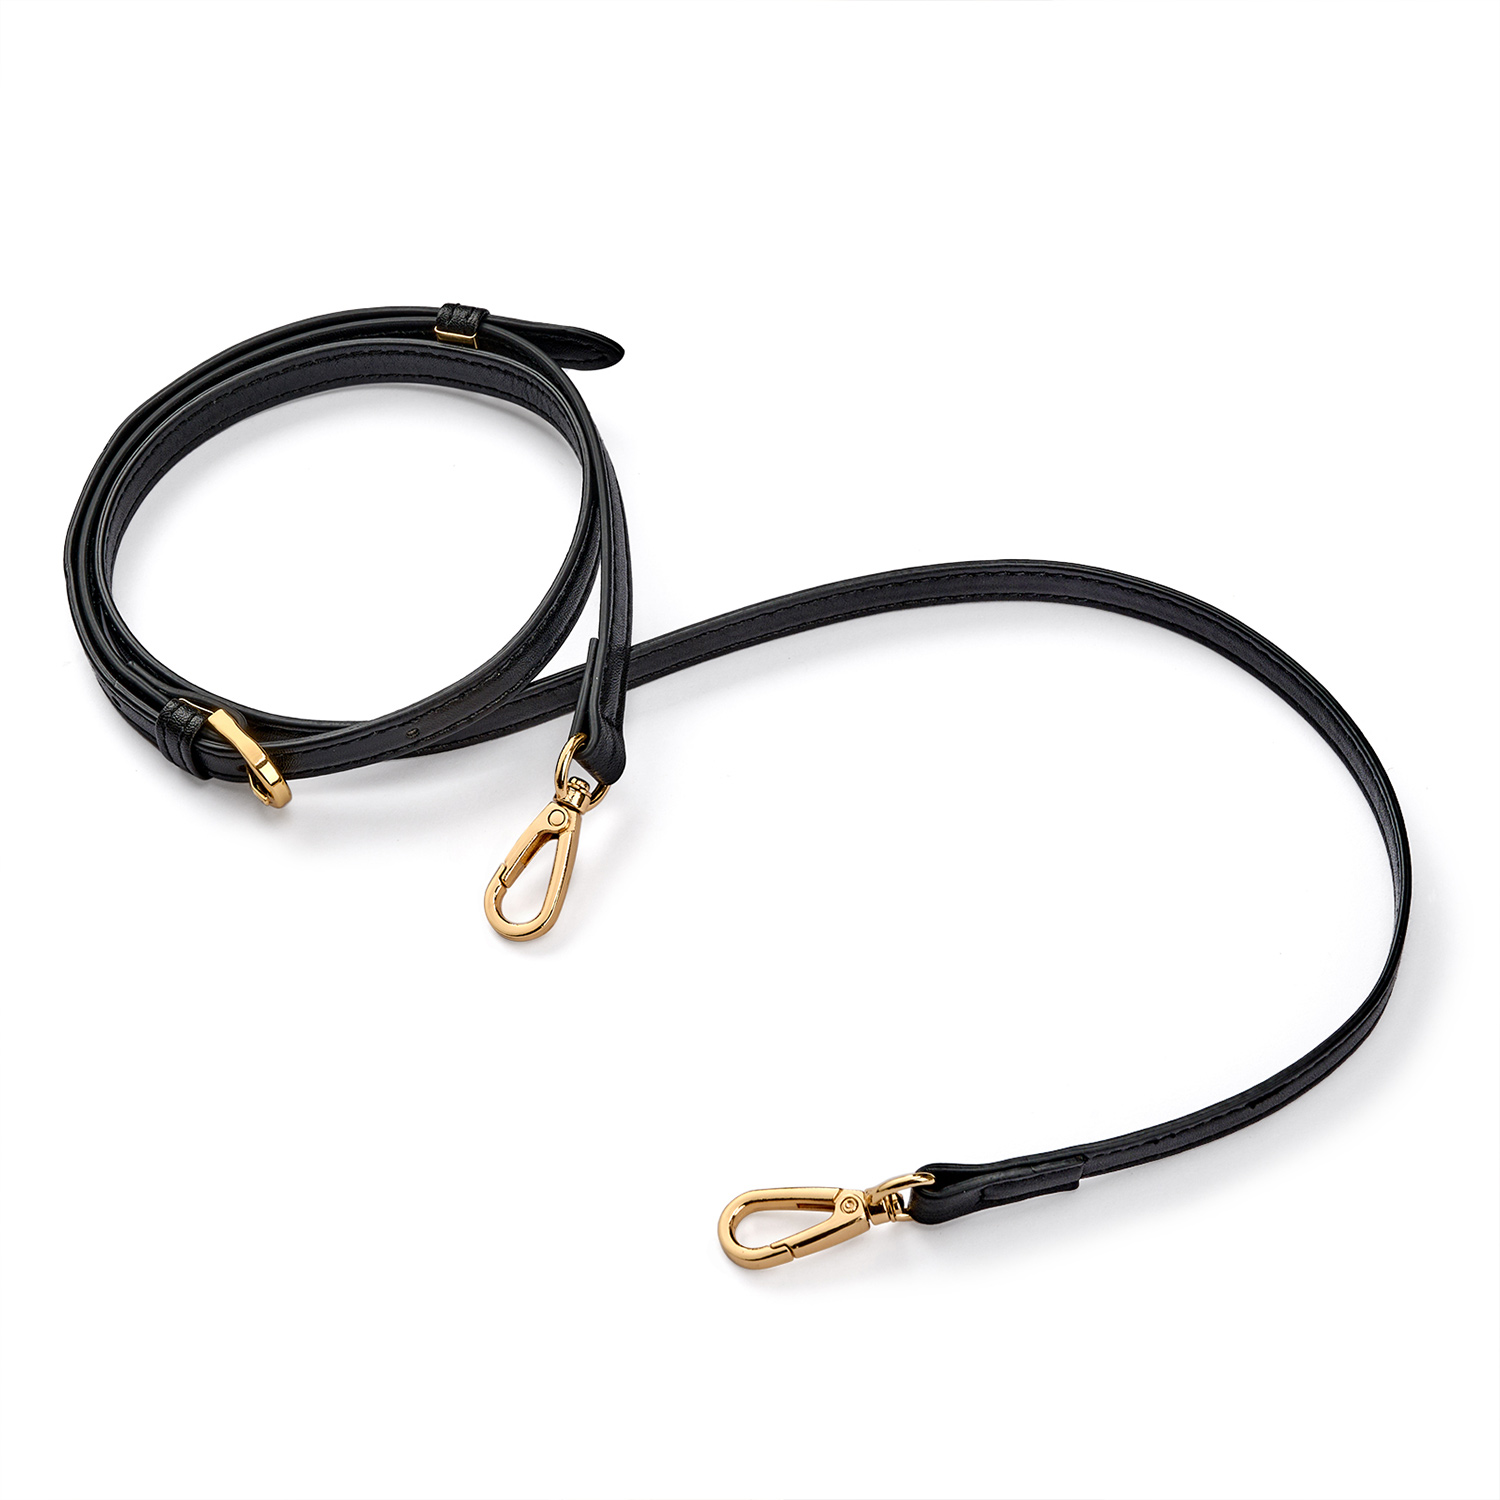 Bag Strap Part Accessories For Handbags Leather Belt Leopard Shoulder Replacement  Purse Straps From Led169, $7.63